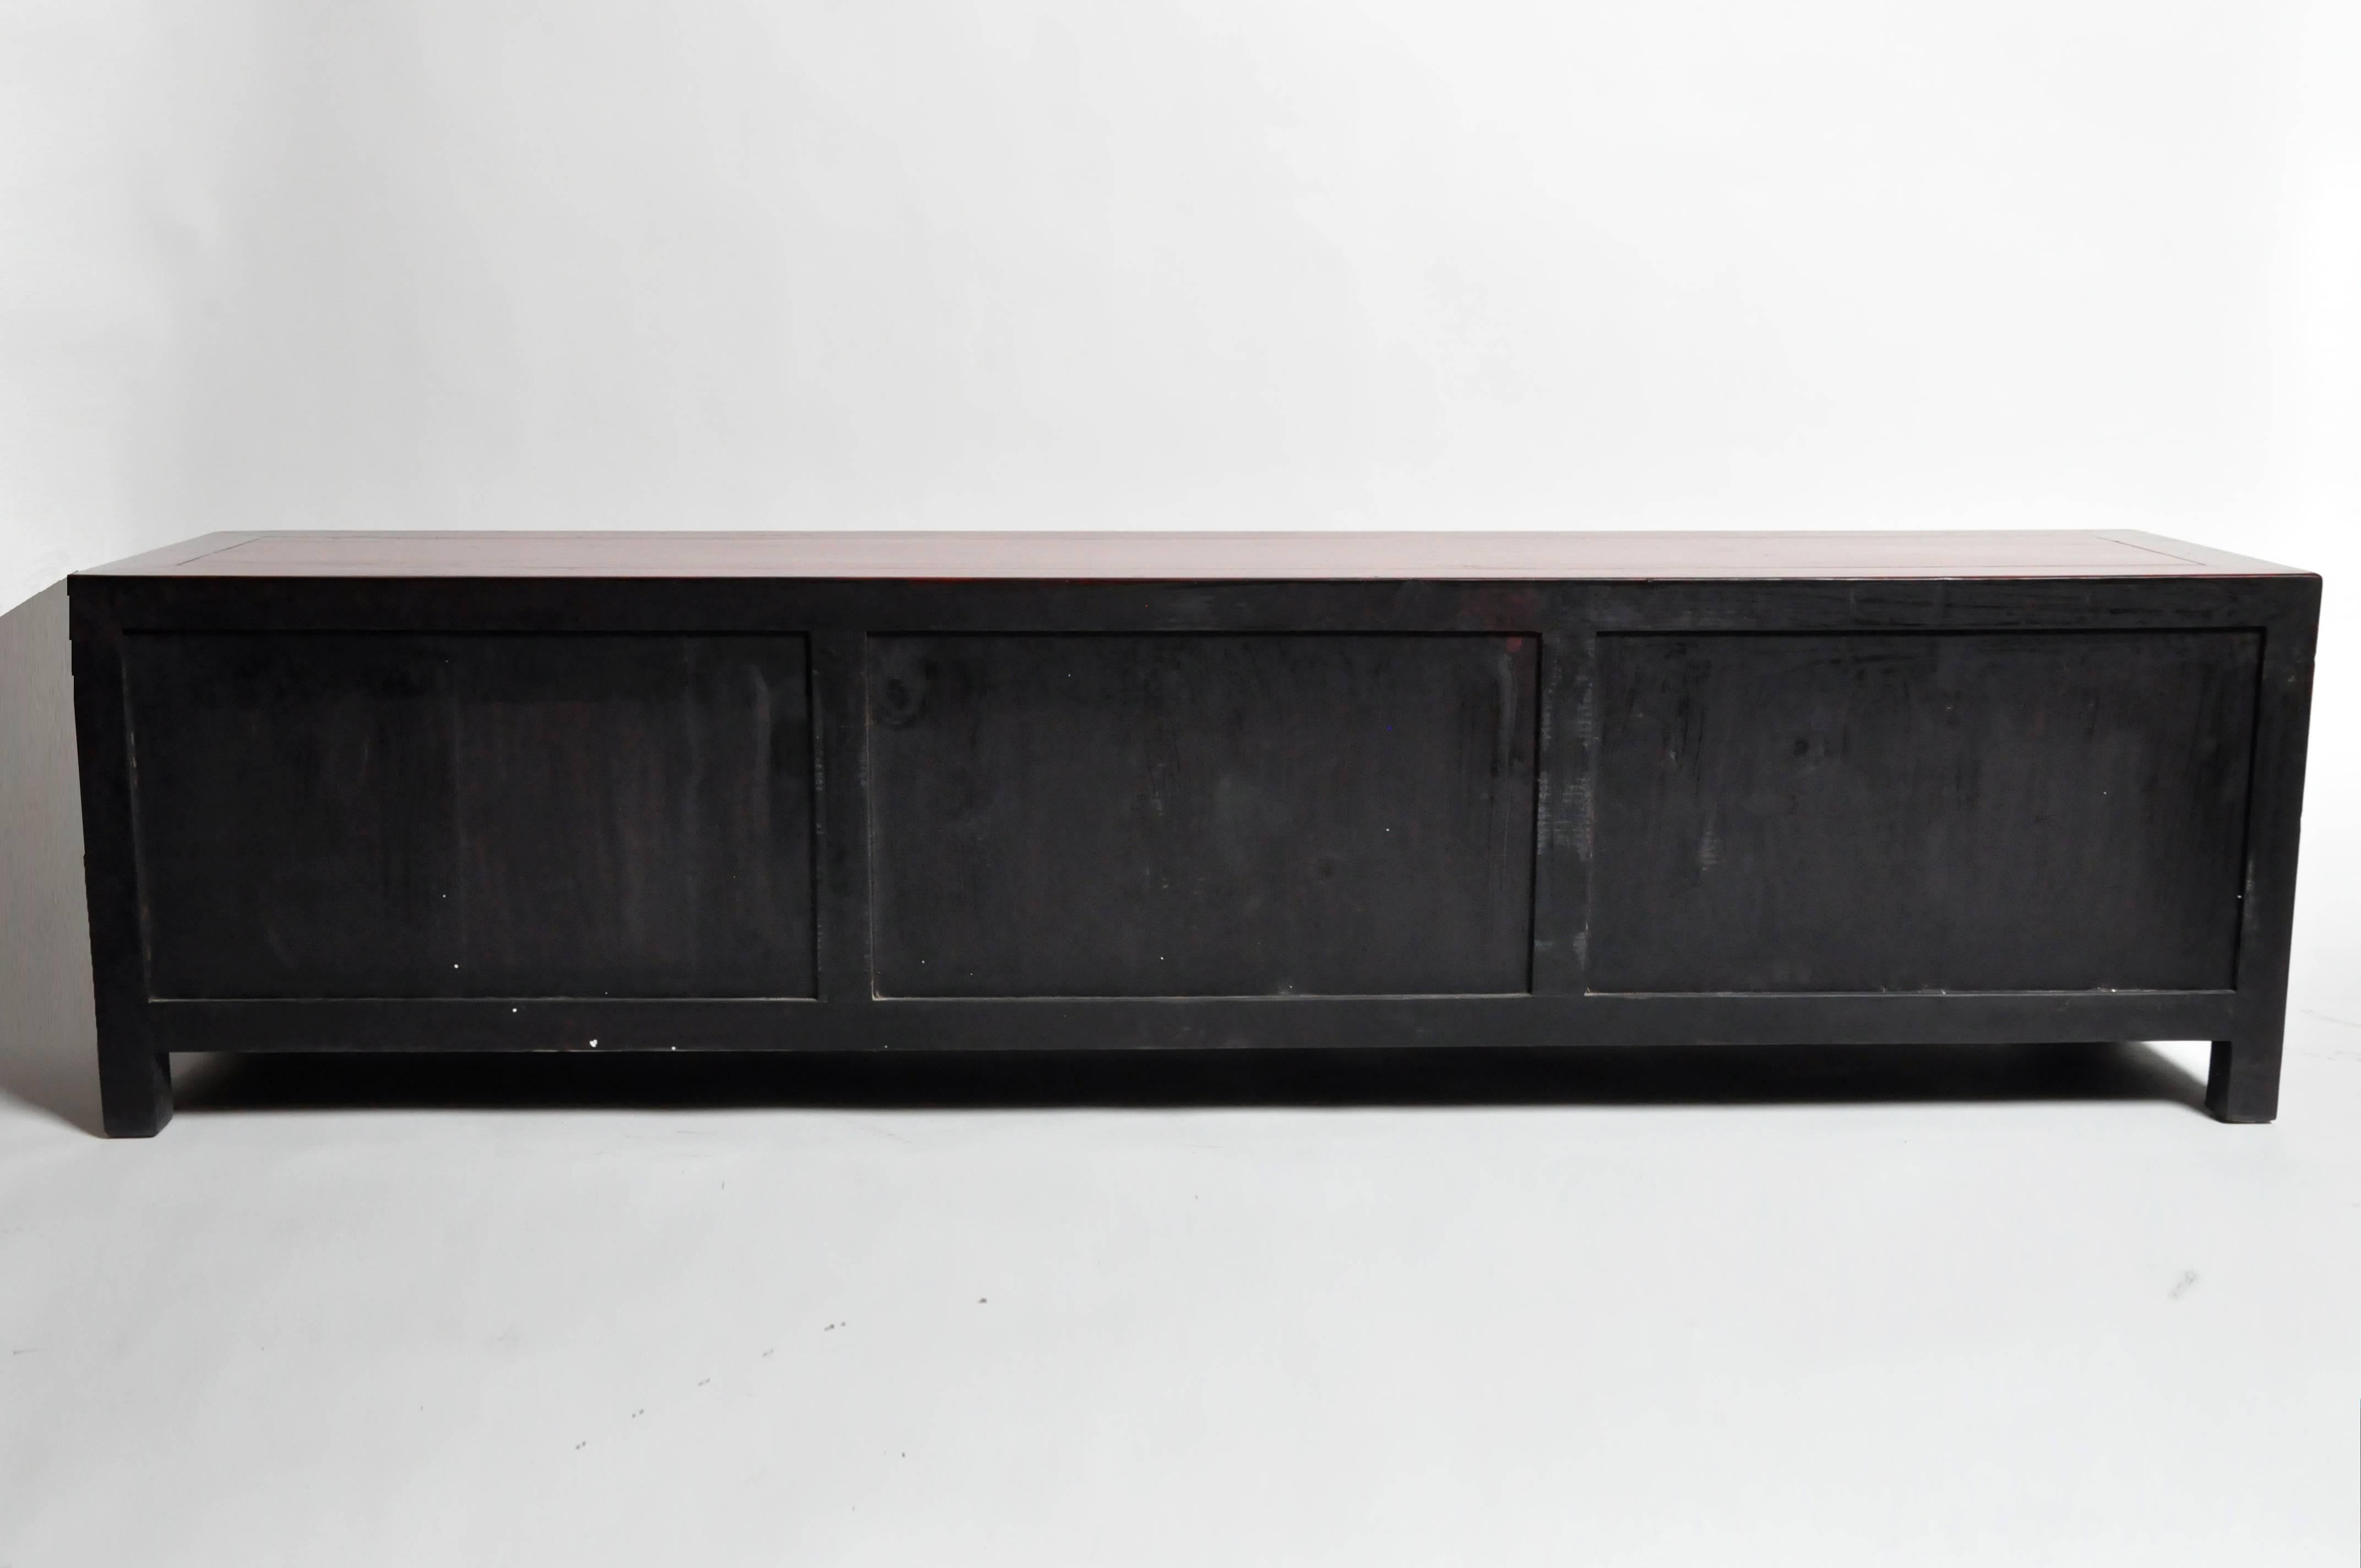 This handsome low chest is from Shandong, China and was made from reclaimed elm wood. The piece features mortise and tenon joinery, red lacquer and three shelves for storage. You can also customize it and make it your own. Wood, color, finish, and